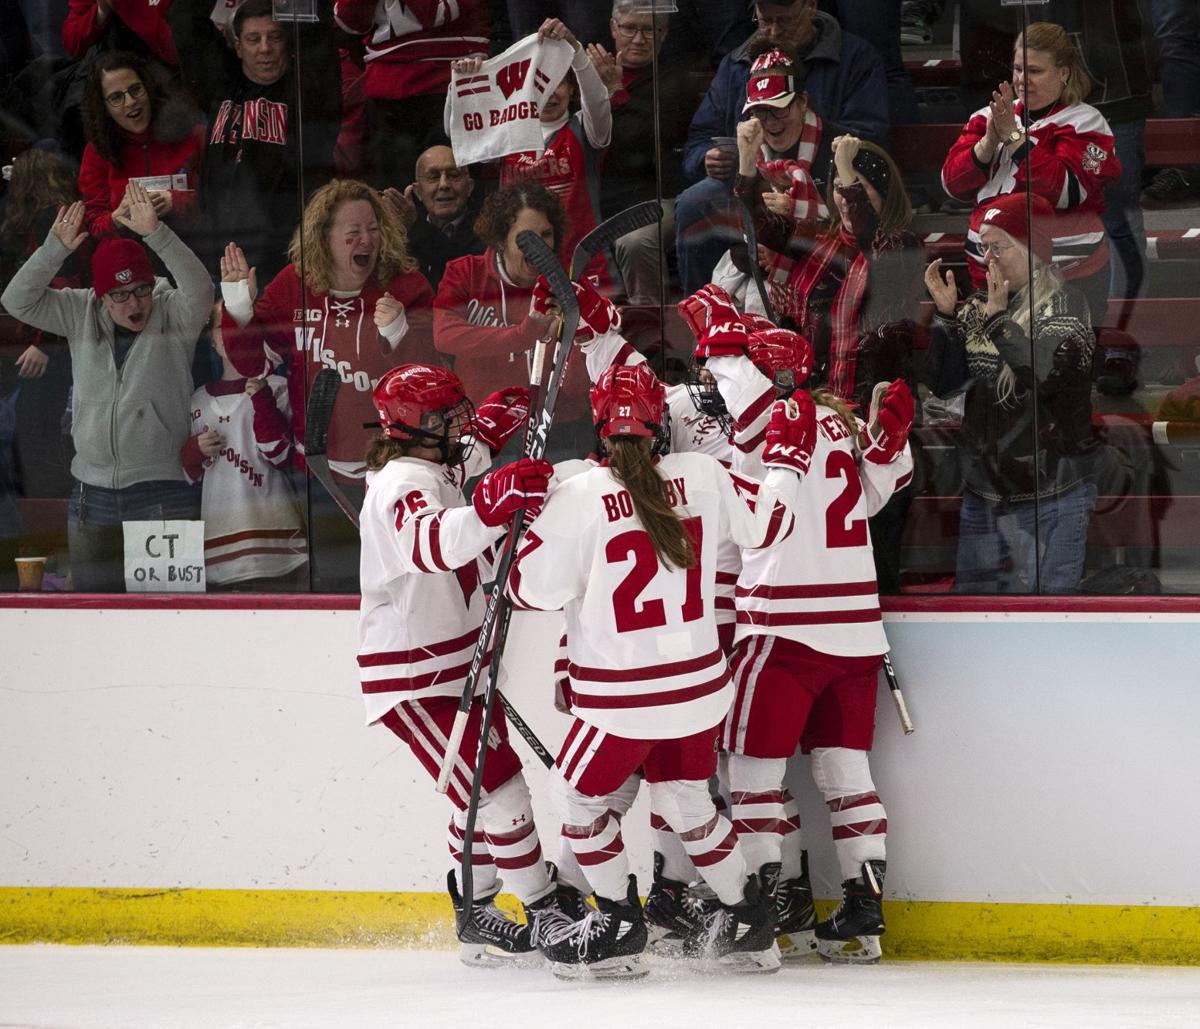 Wisconsin Badgers women's hockey team plays to slightly larger crowds